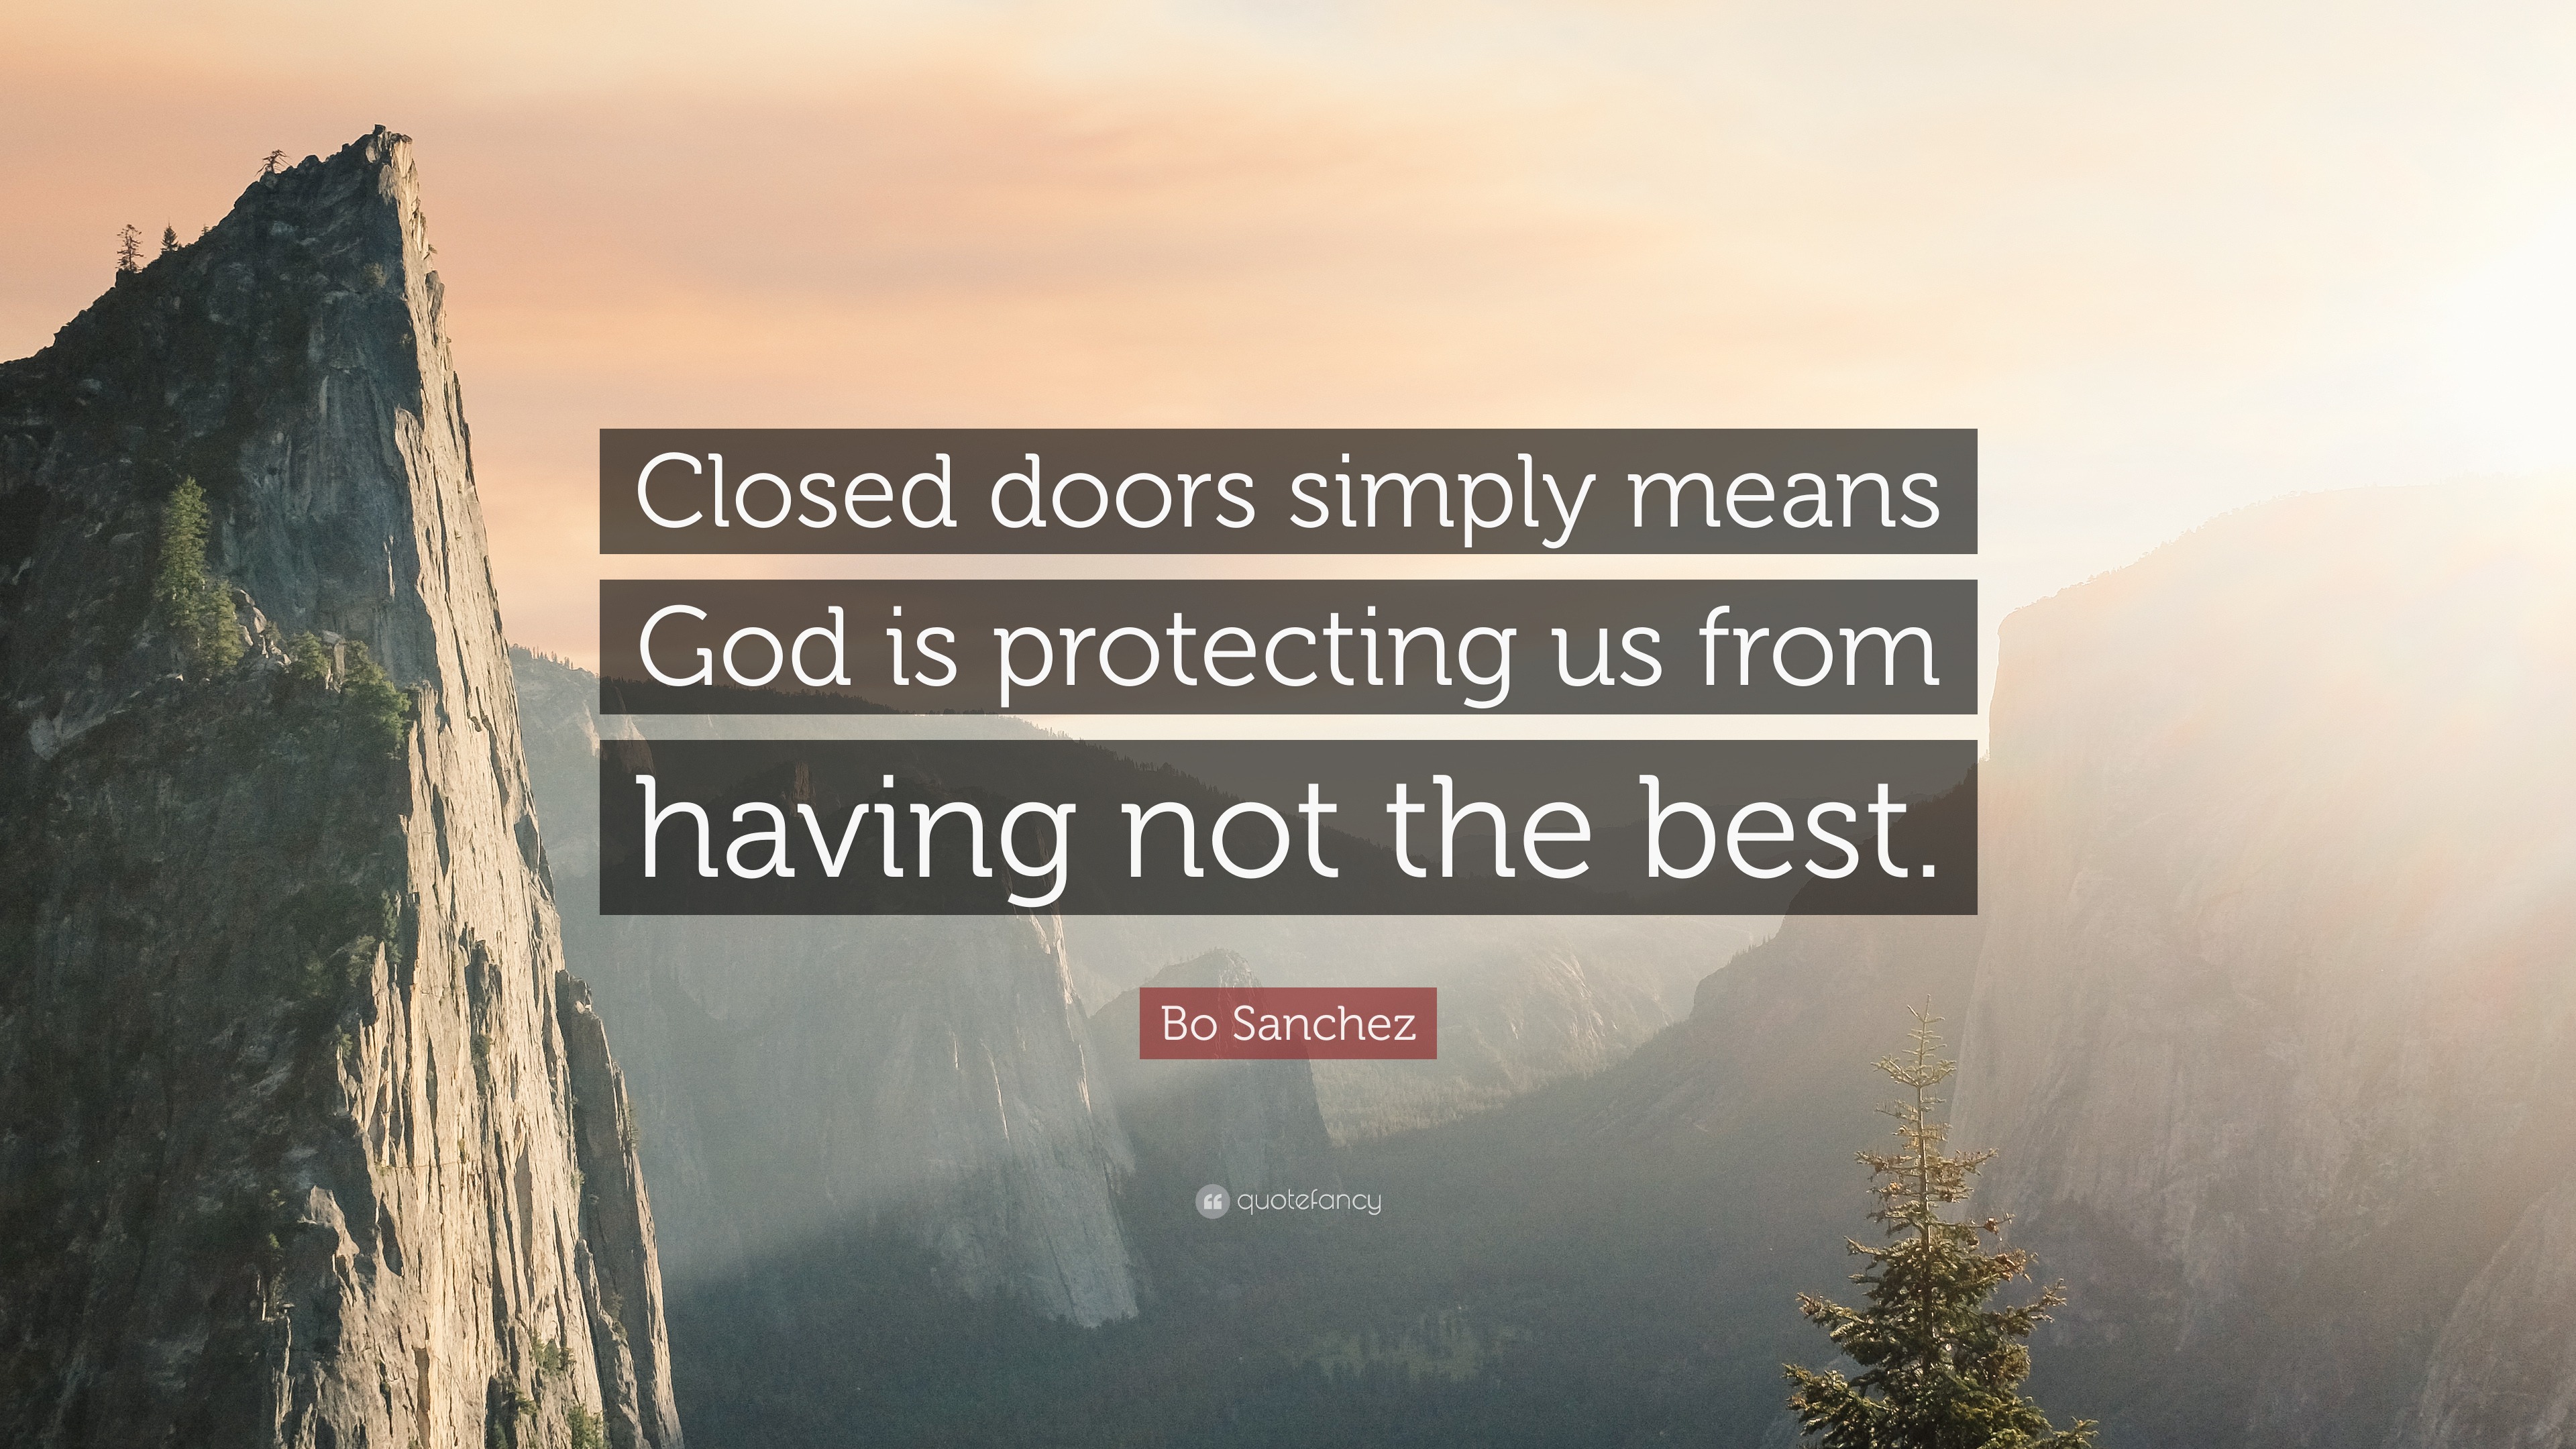 Bo Sanchez Quote: “Closed doors simply means God is protecting us from ...